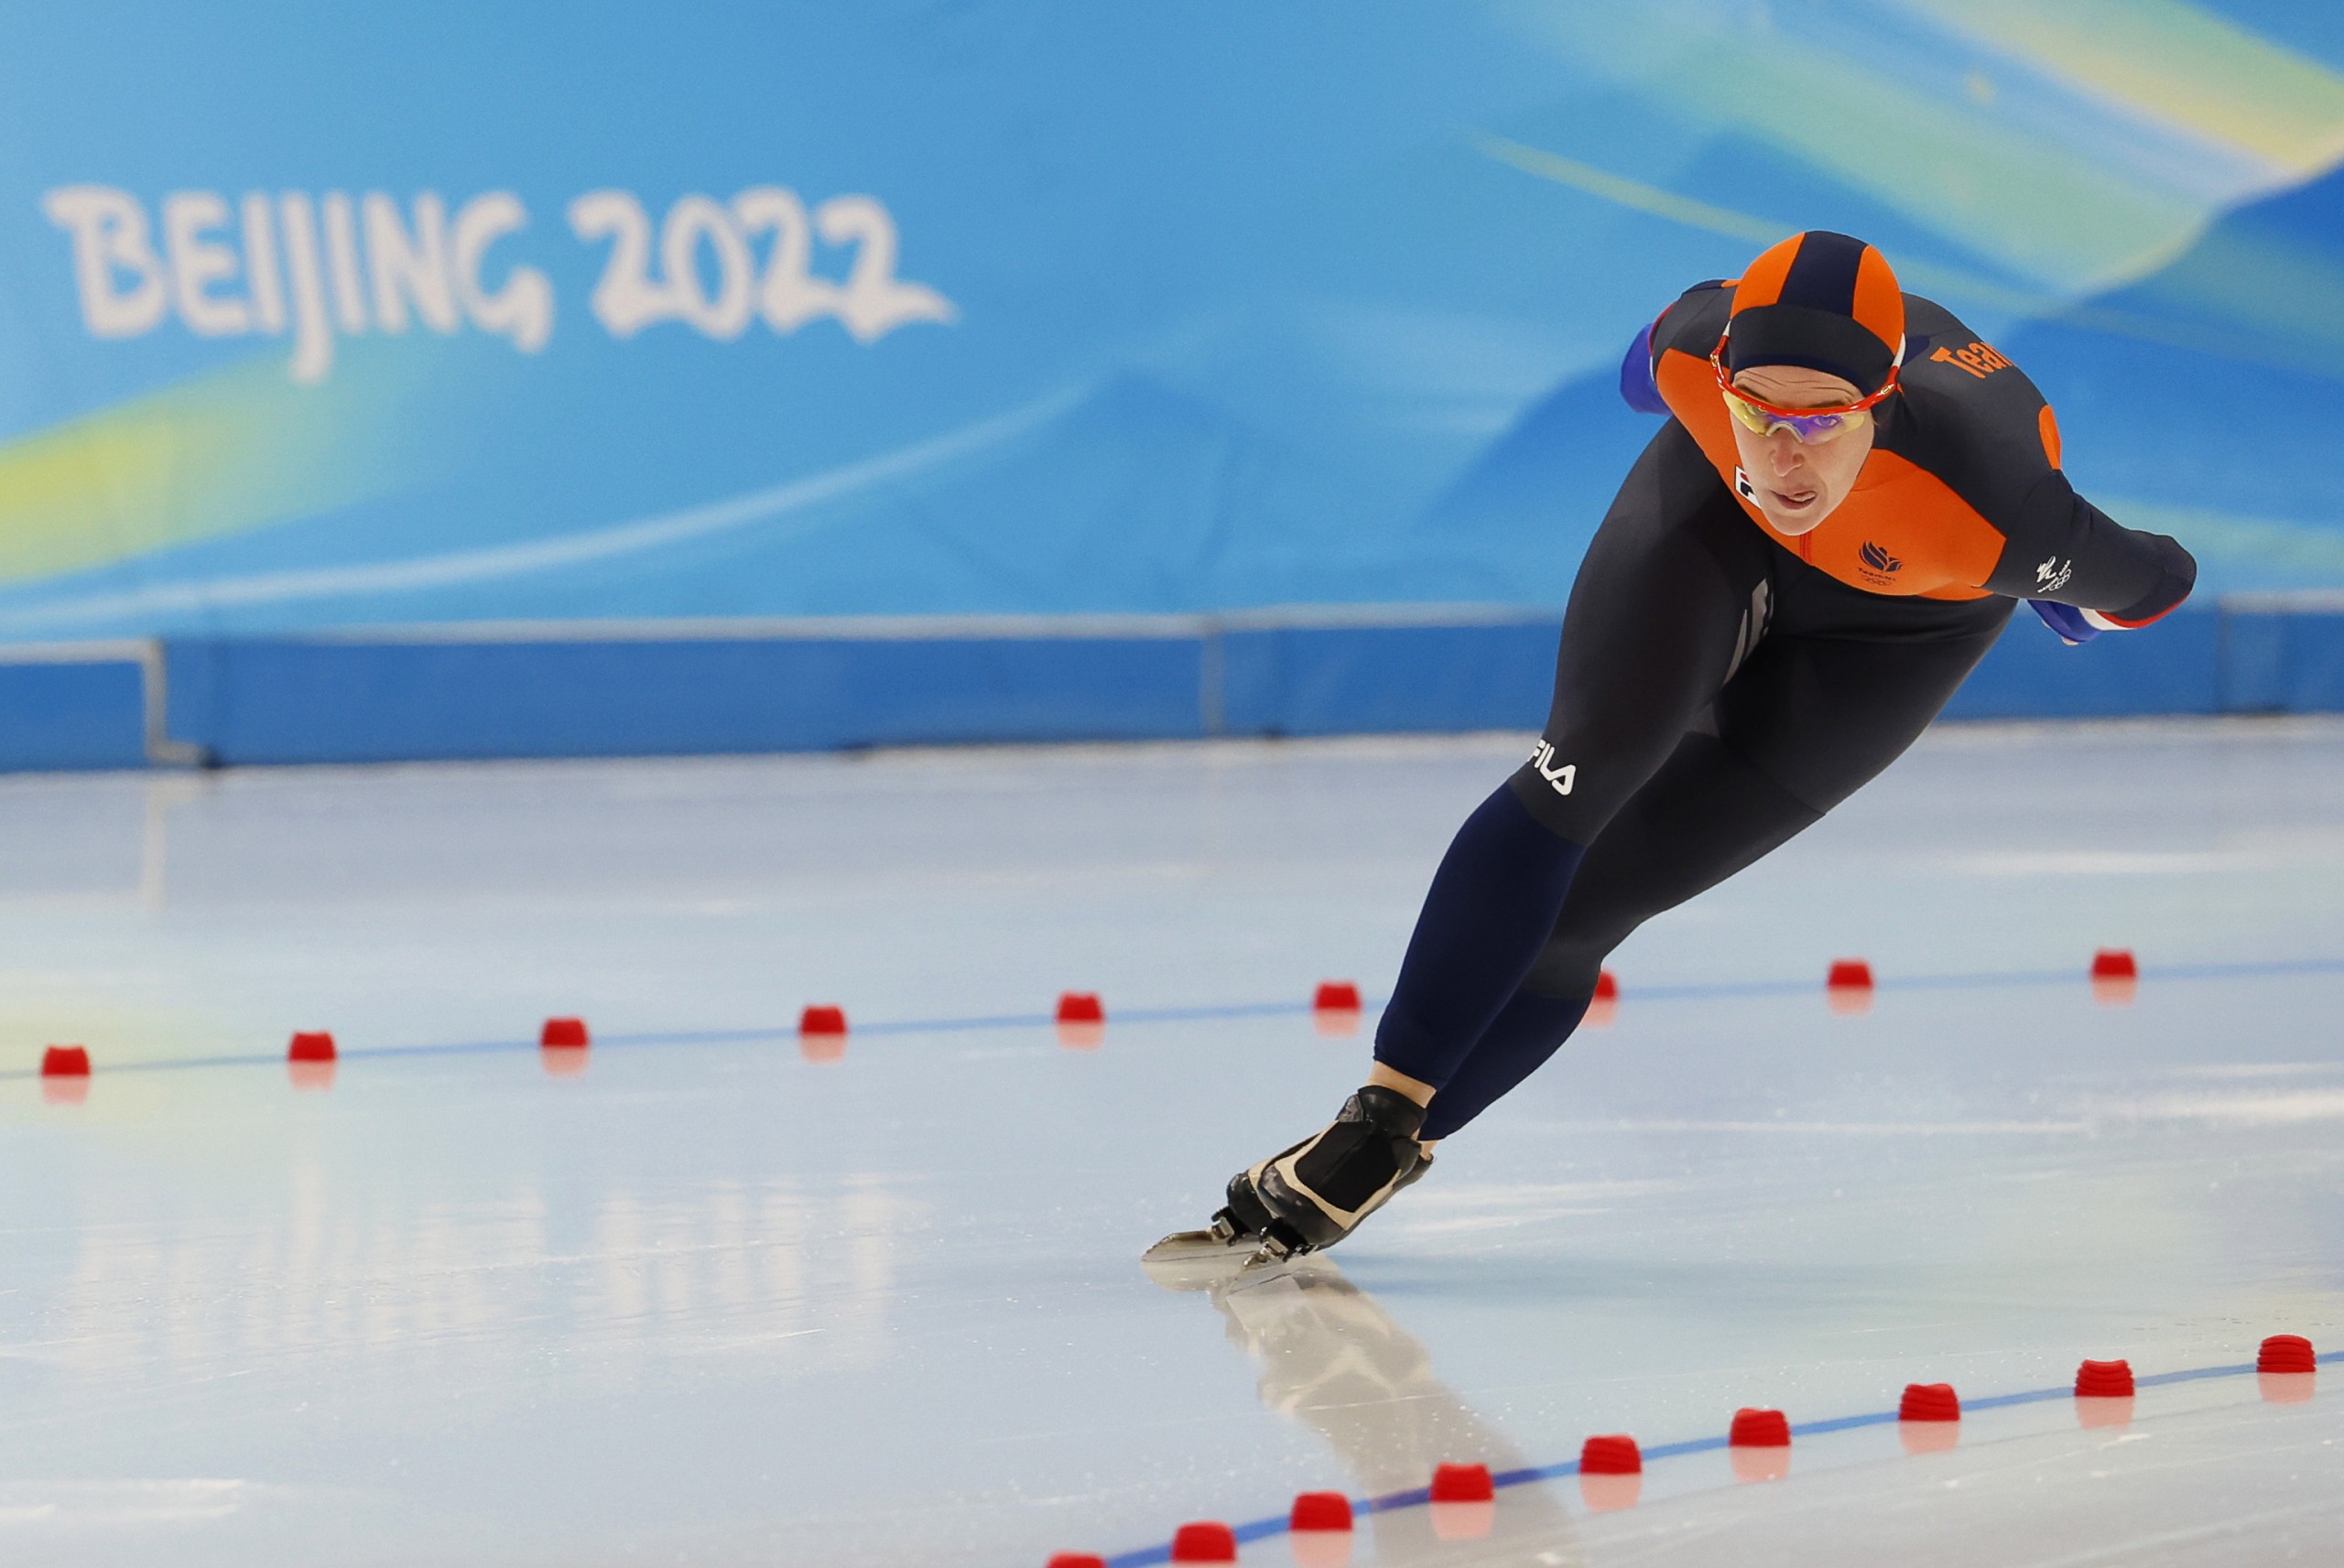 epa09734977 Ireen Wust of the Netherlands competes during the Women's Speed Skating 1,500m event at the Beijing 2022 Olympic Games in Beijing, China, 07 February 2022.  EPA/ALEX PLAVEVSKI